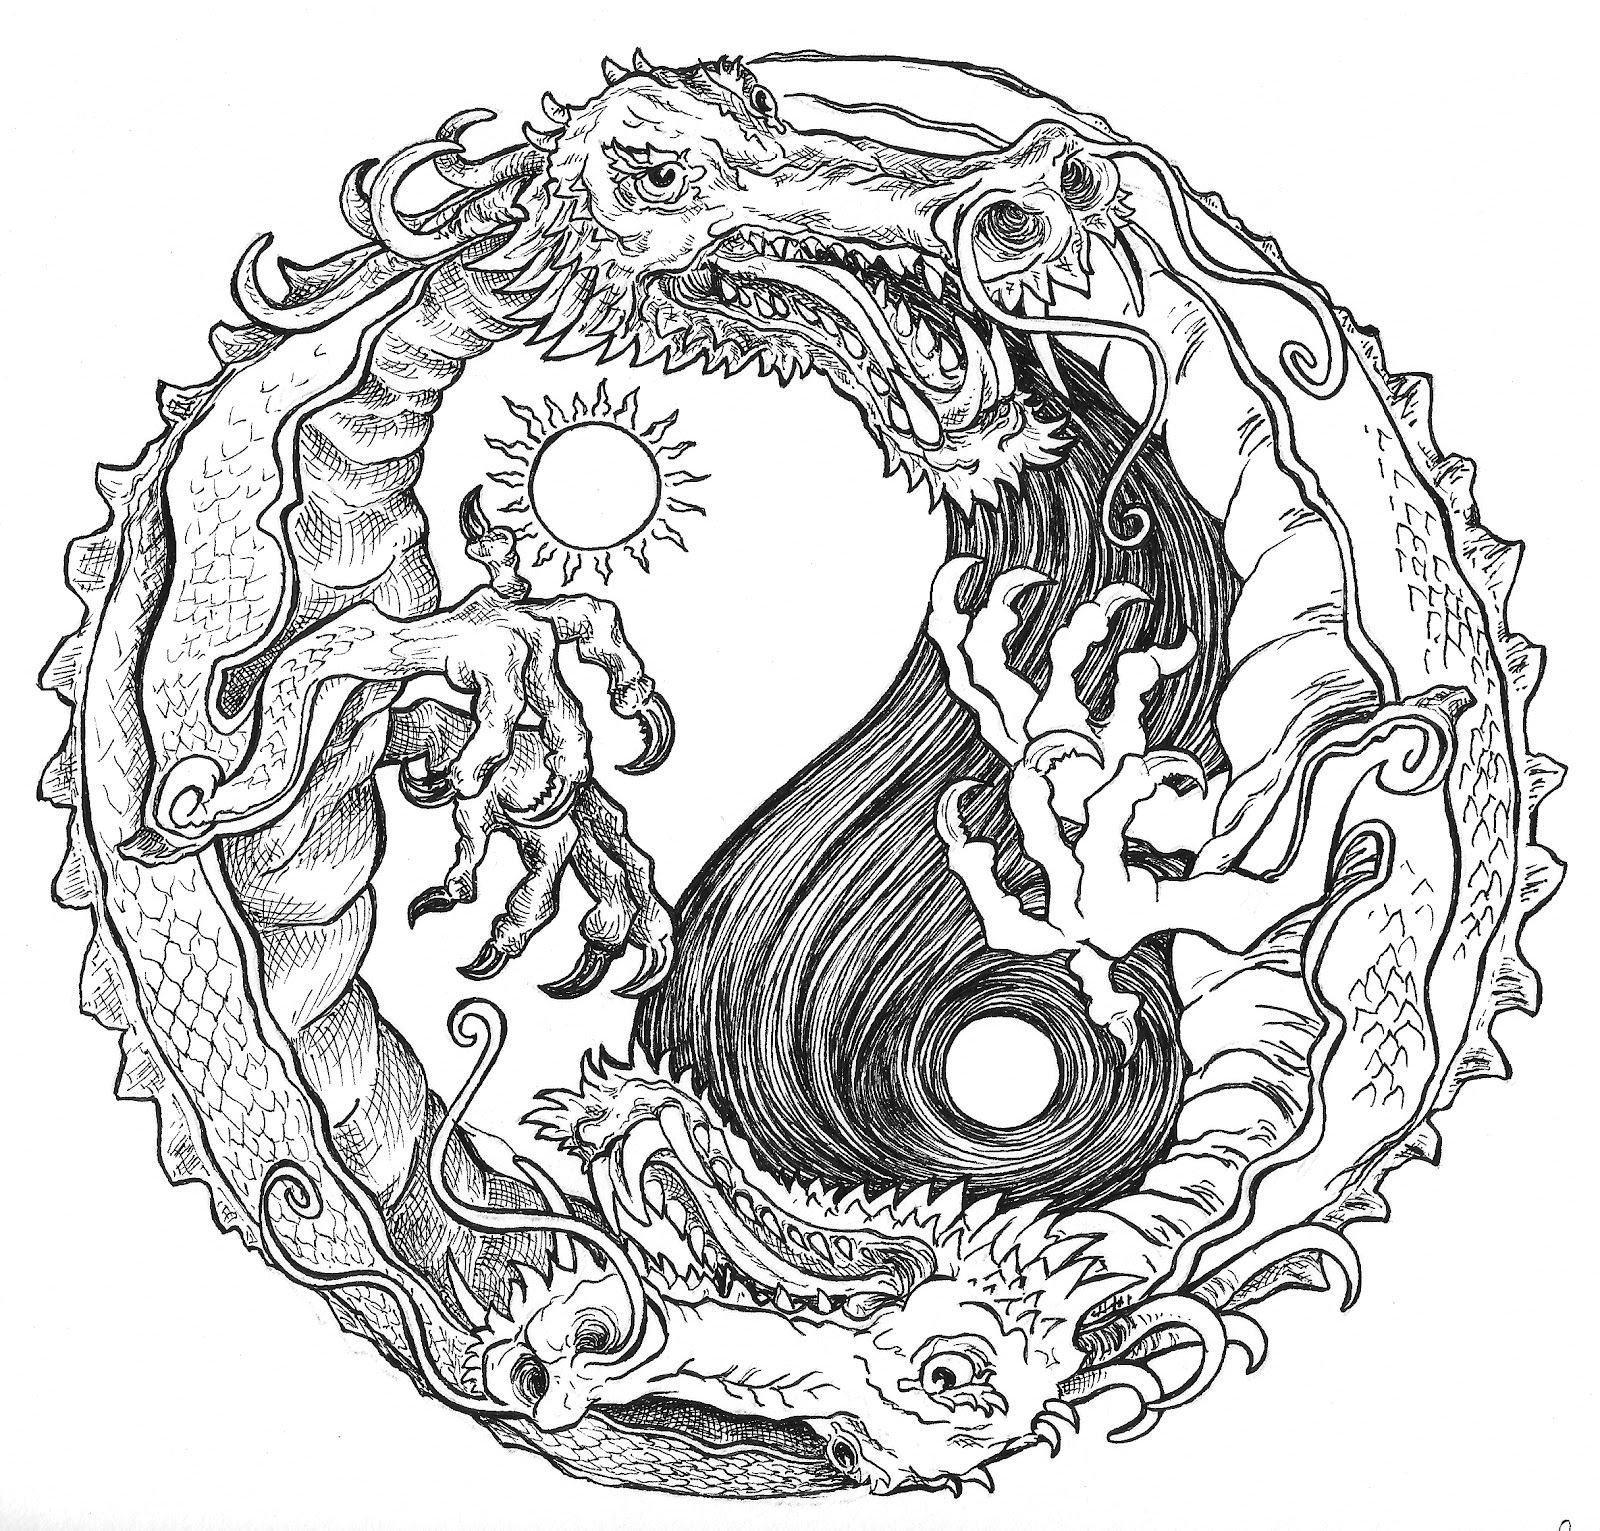 Sun And Moon Dragon Yin Yang Coloring Pages Colouring Adult Detailed - Free Printable Coloring Pages For Adults Advanced